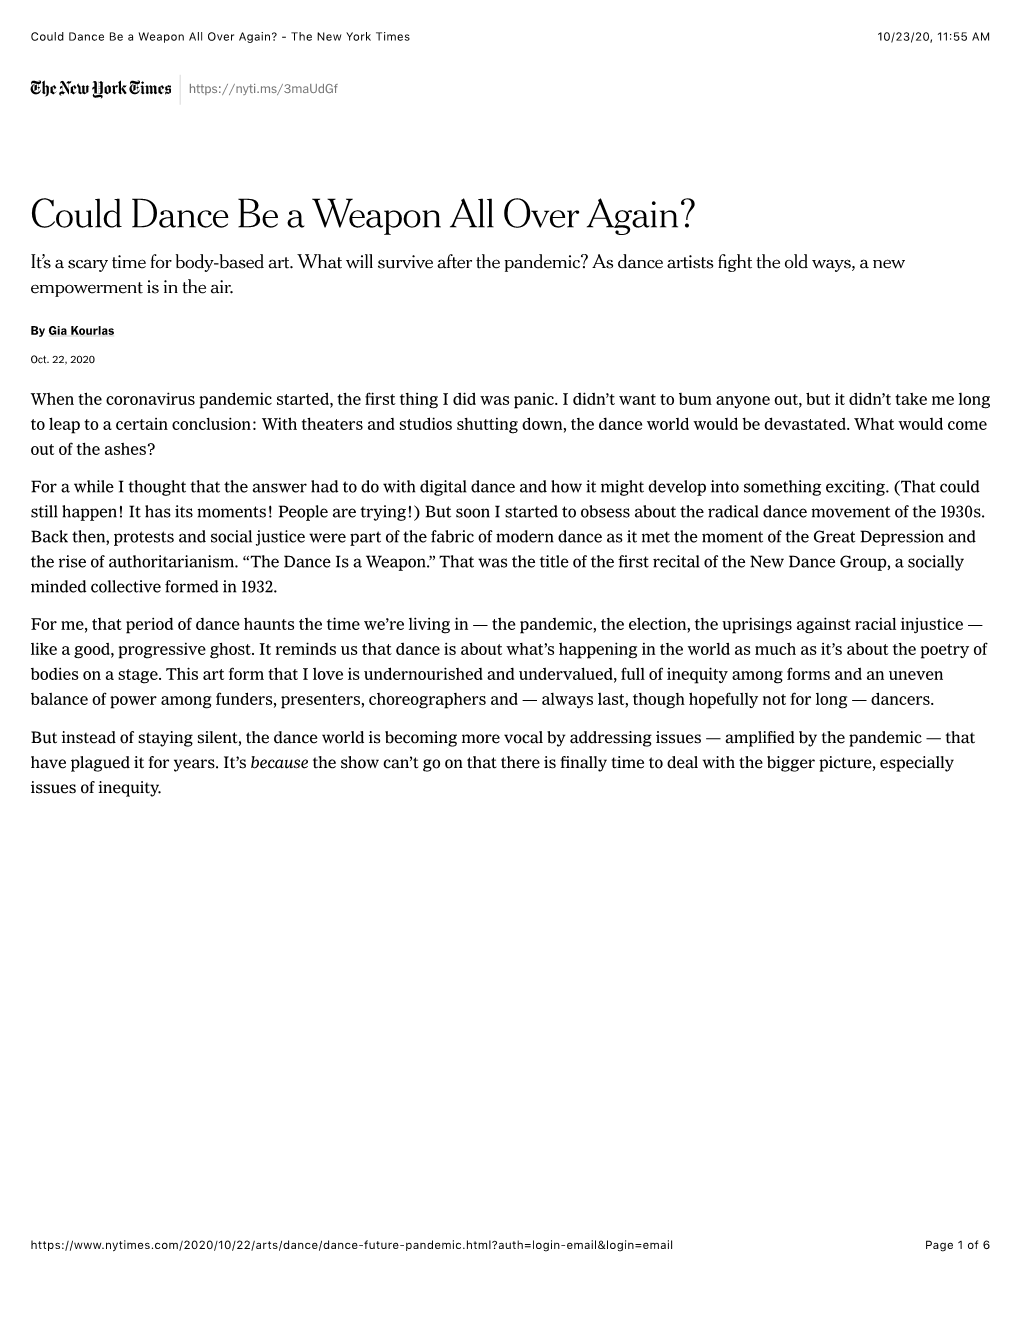 Could Dance Be a Weapon All Over Again? - the New York Times 10/23/20, 11�55 AM